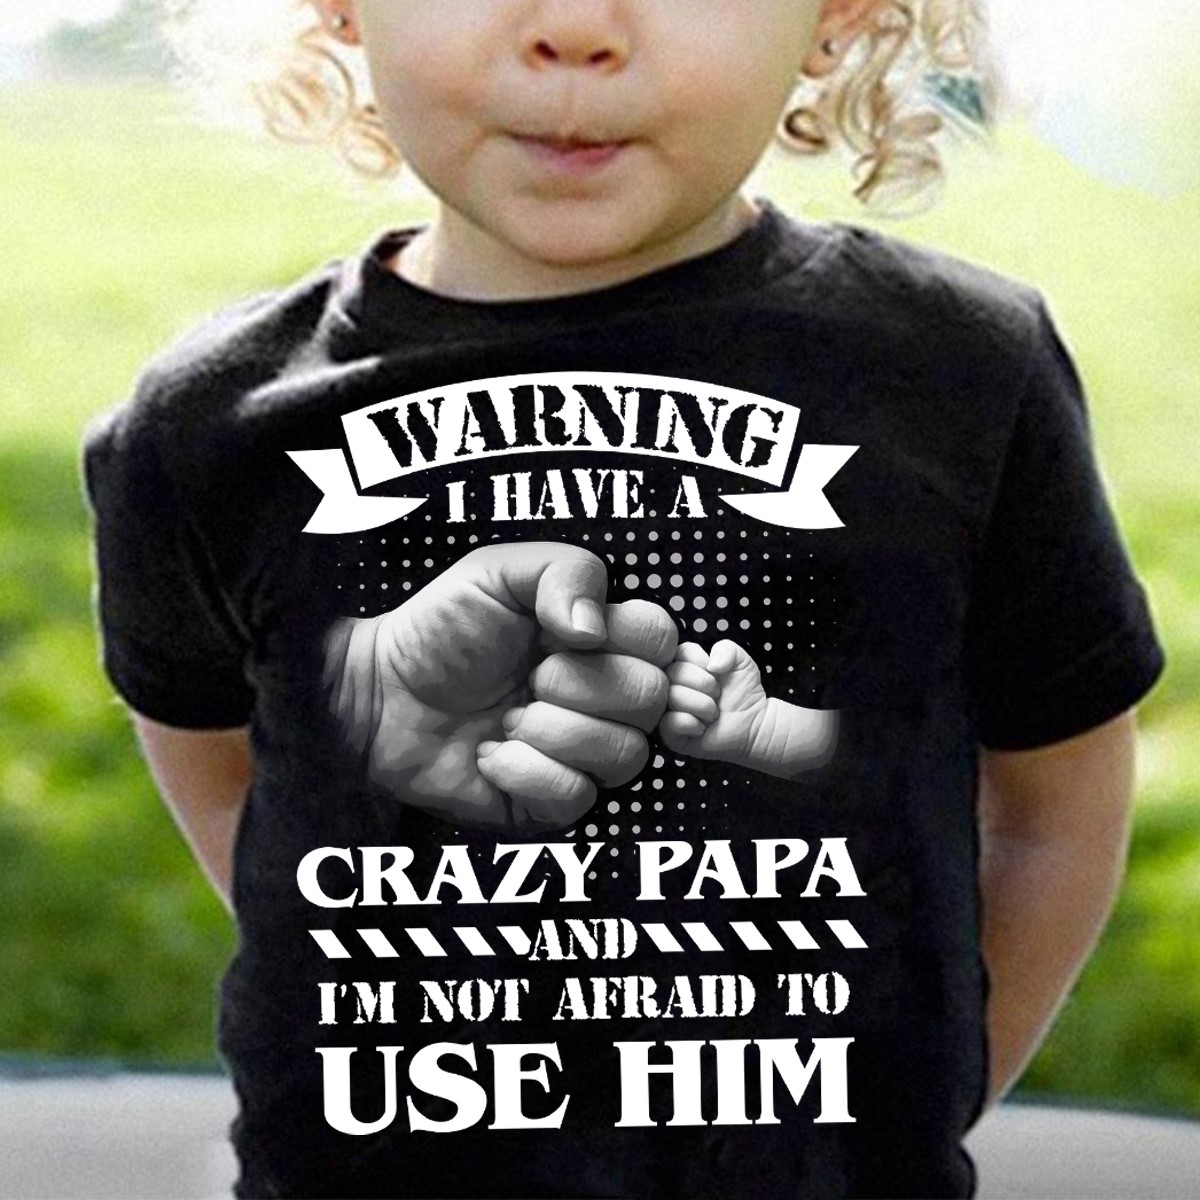 Warning I have a crazy papa and I'm not afraid to use him - Father's day gift